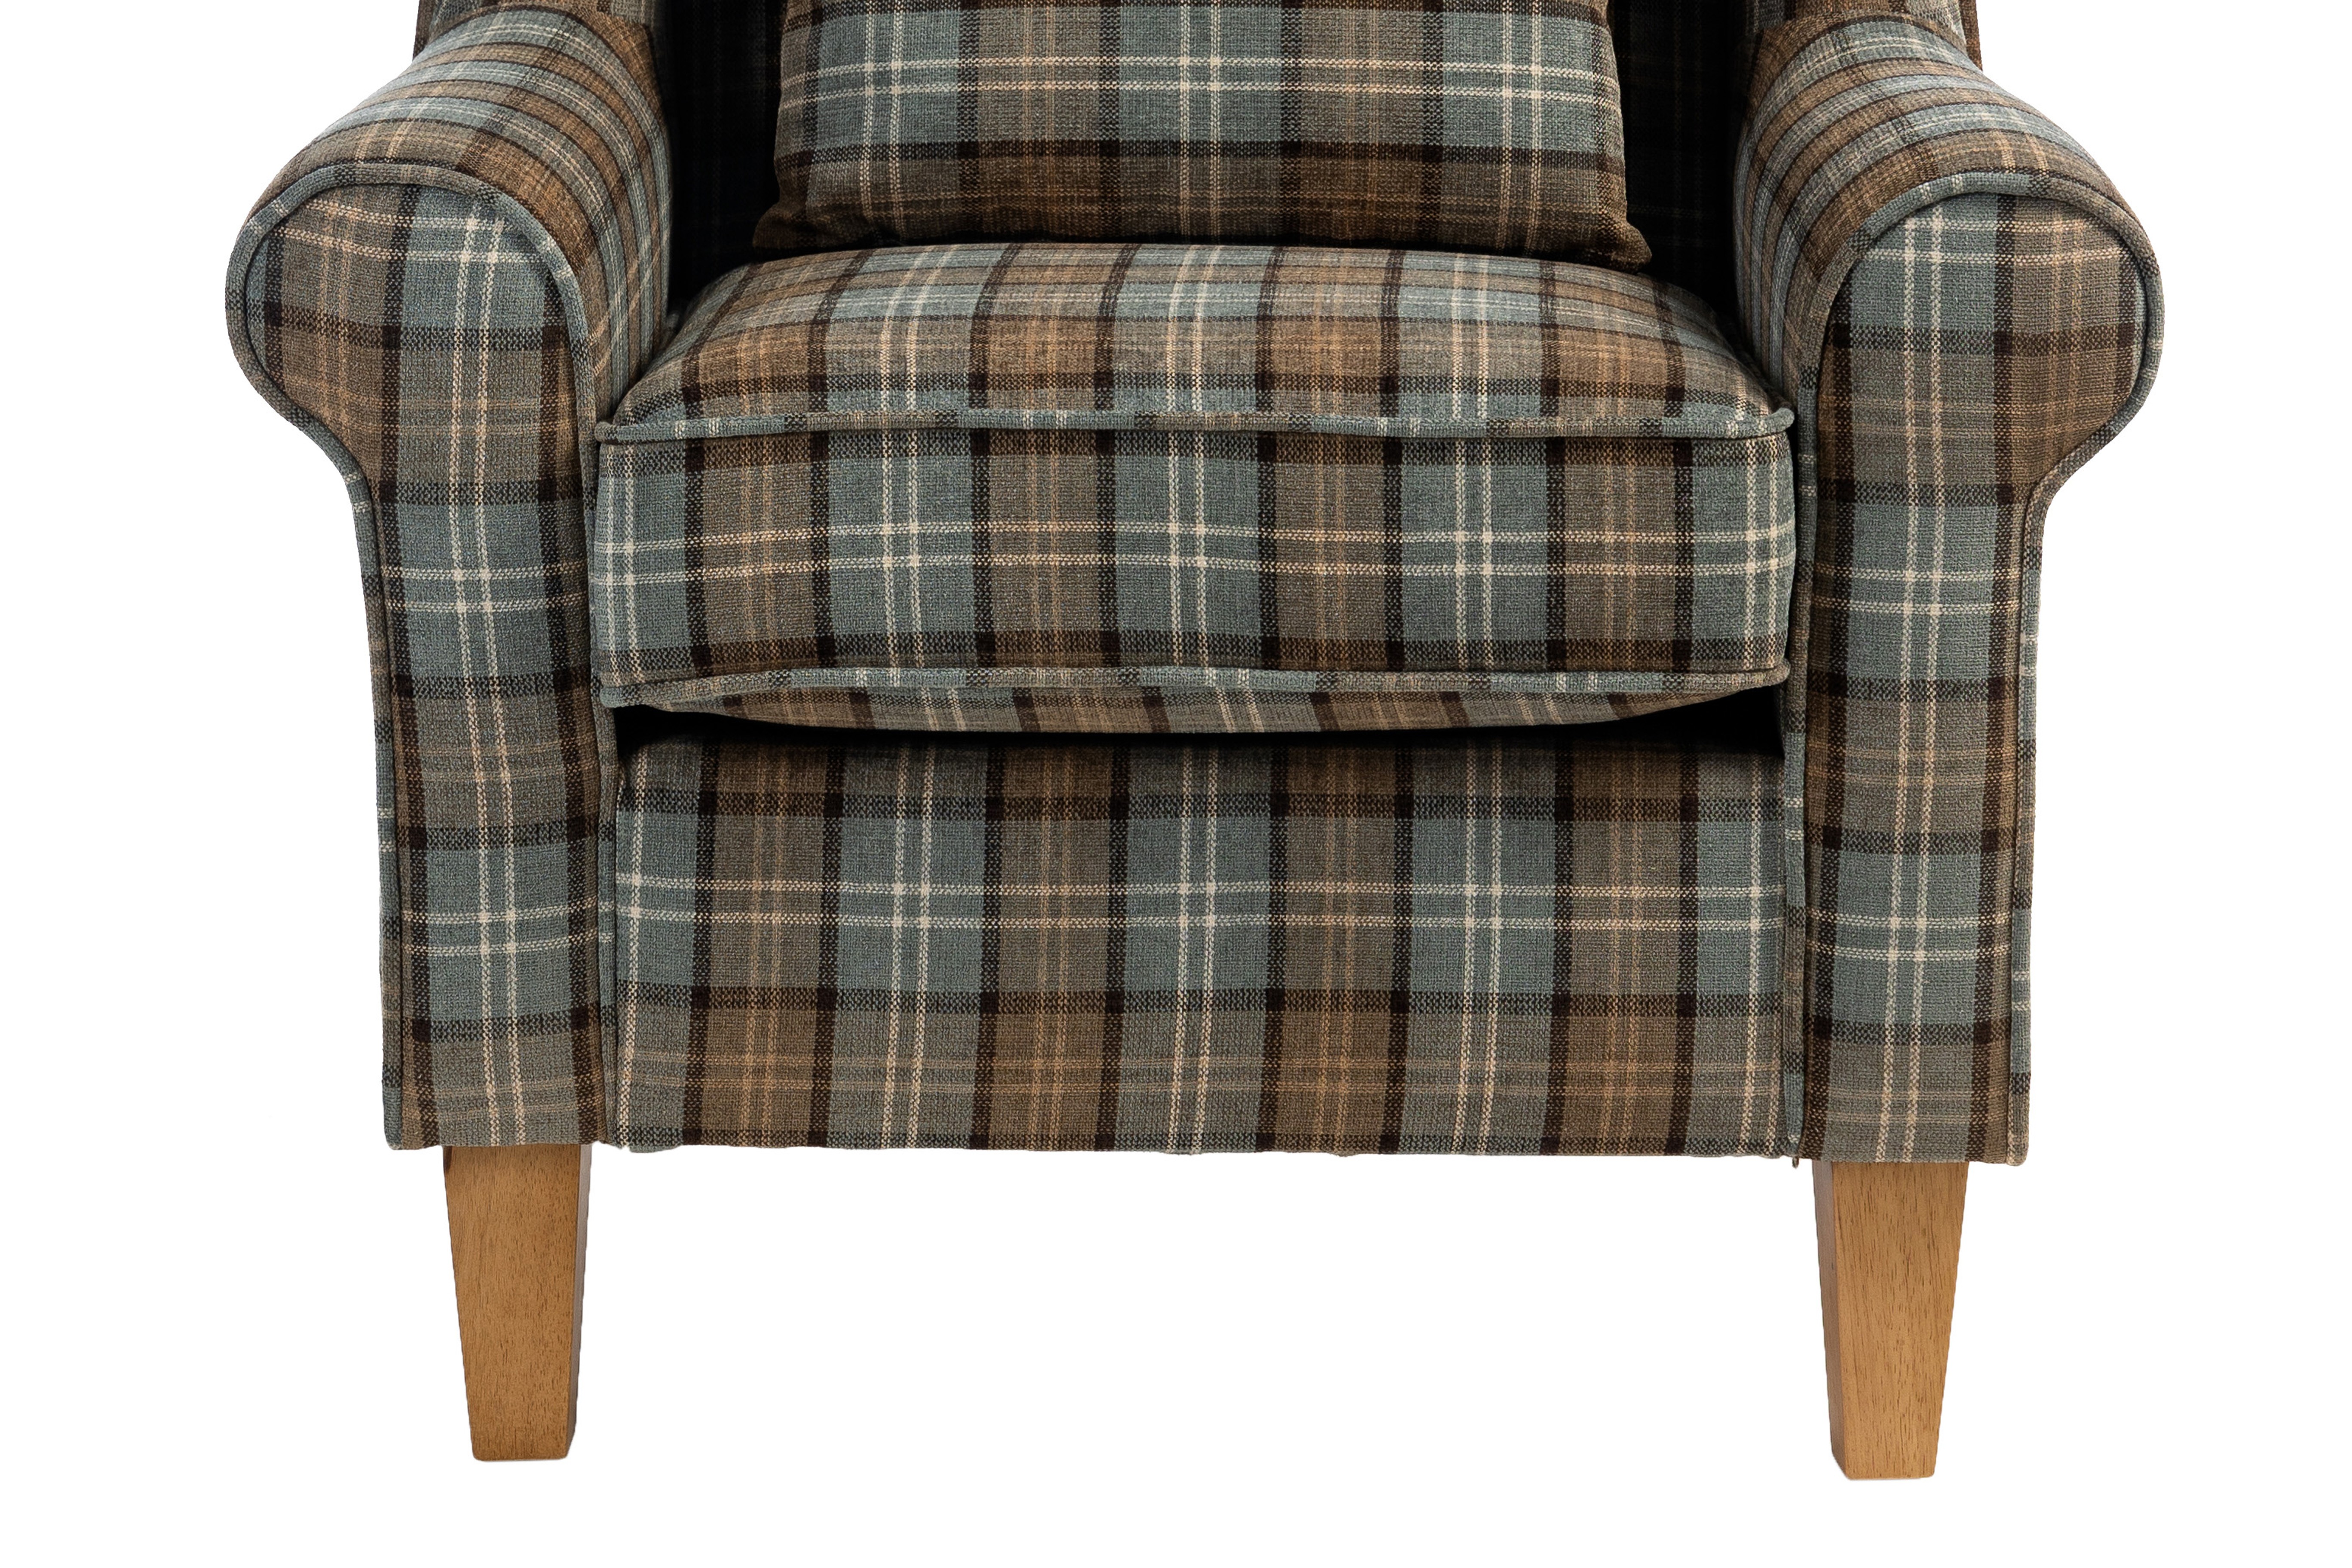 Motcomb Armchair and Footstool with Scatter Cushion